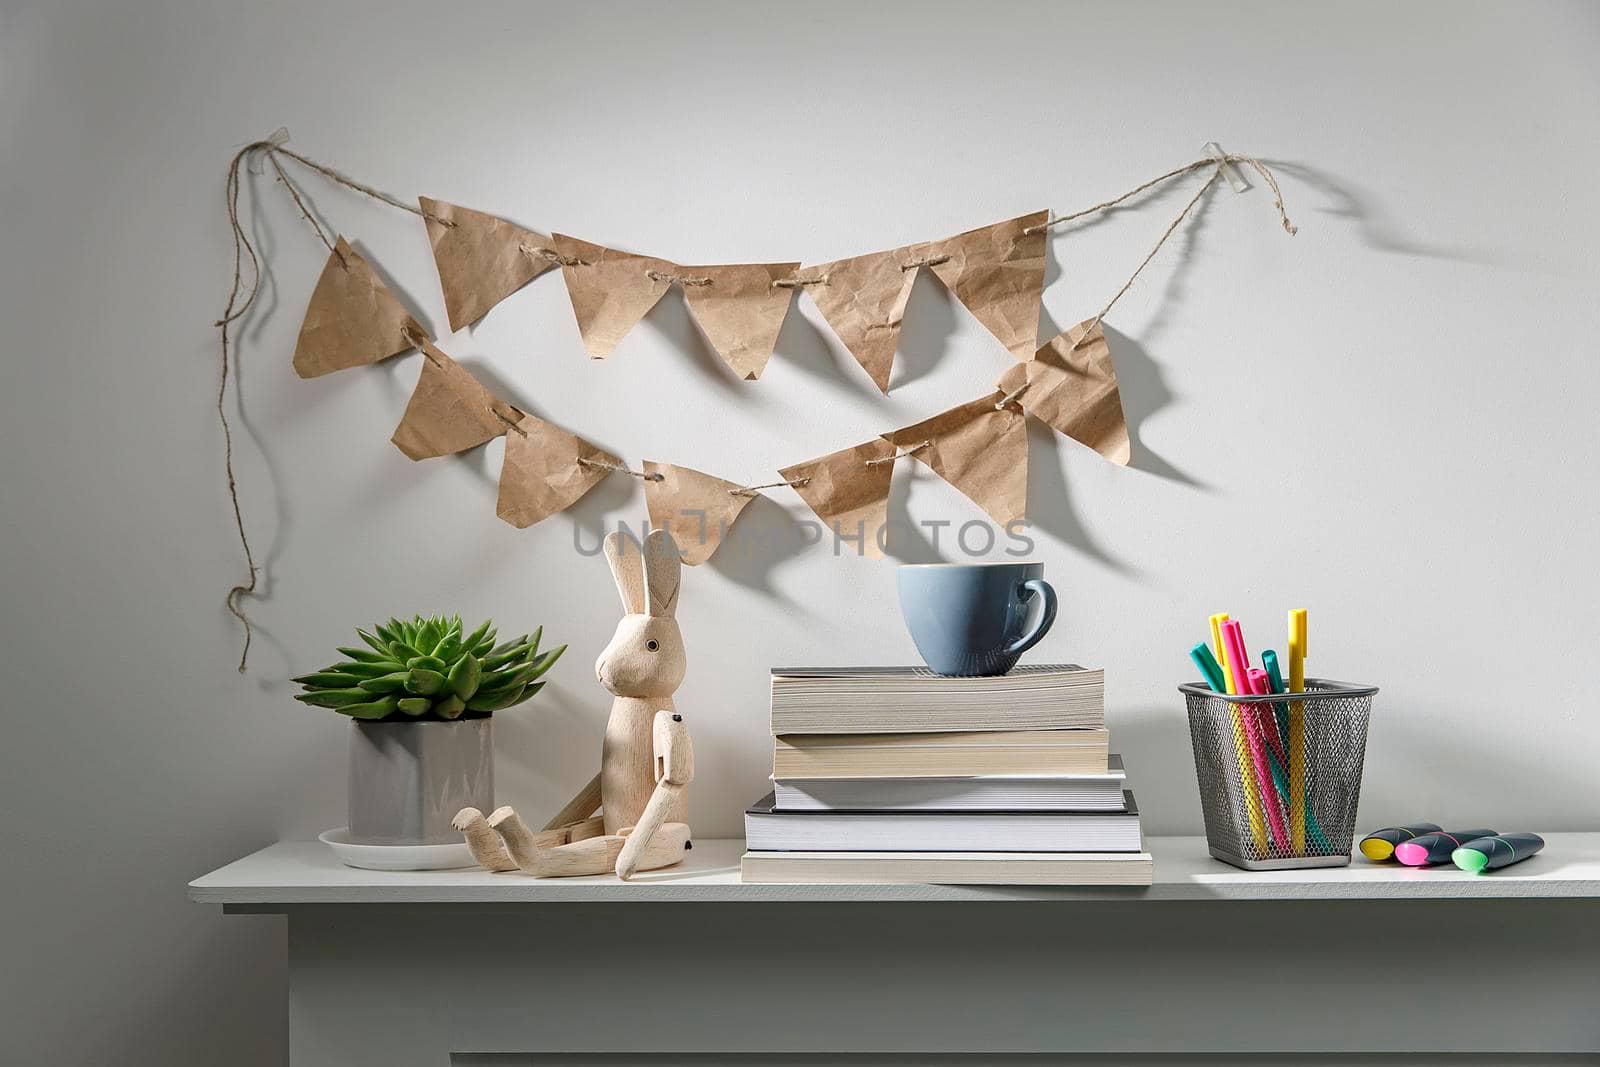 Echeveria in geometric pot, stack of books, pens in a pencil holder, felt-tip pens, wooden figurine of a hare are on shelf. Garland of craft paper flags on the wall above the shelf. Place for text by elenarostunova